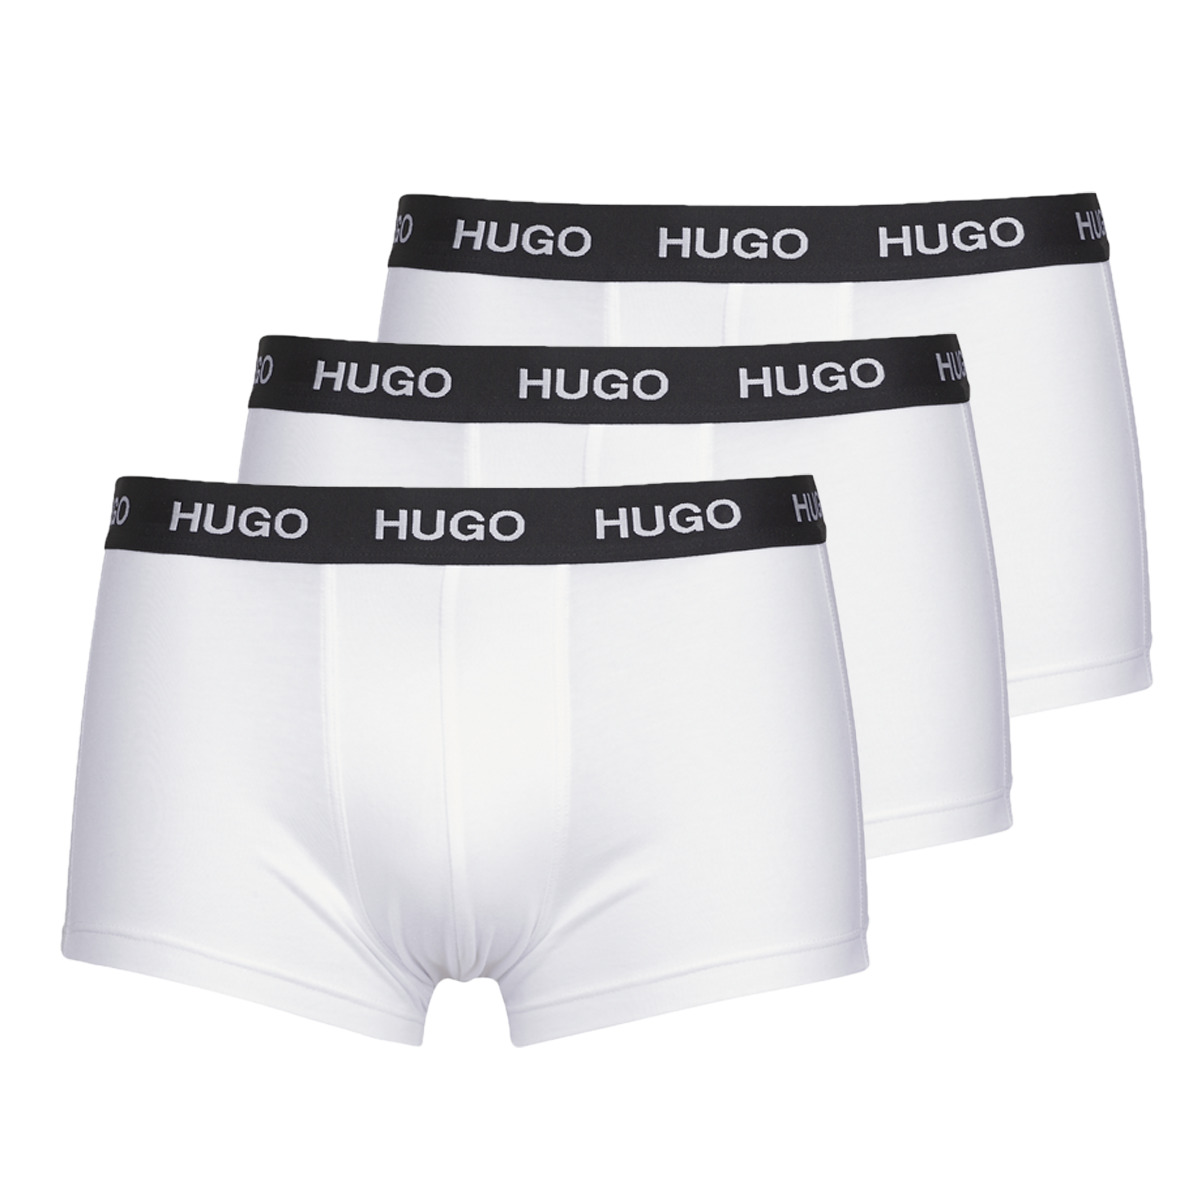 HUGO TRUNK TRIPLET ! Men | 36,80 White delivery Underwear - € PACK - Europe Spartoo shorts Boxer Fast